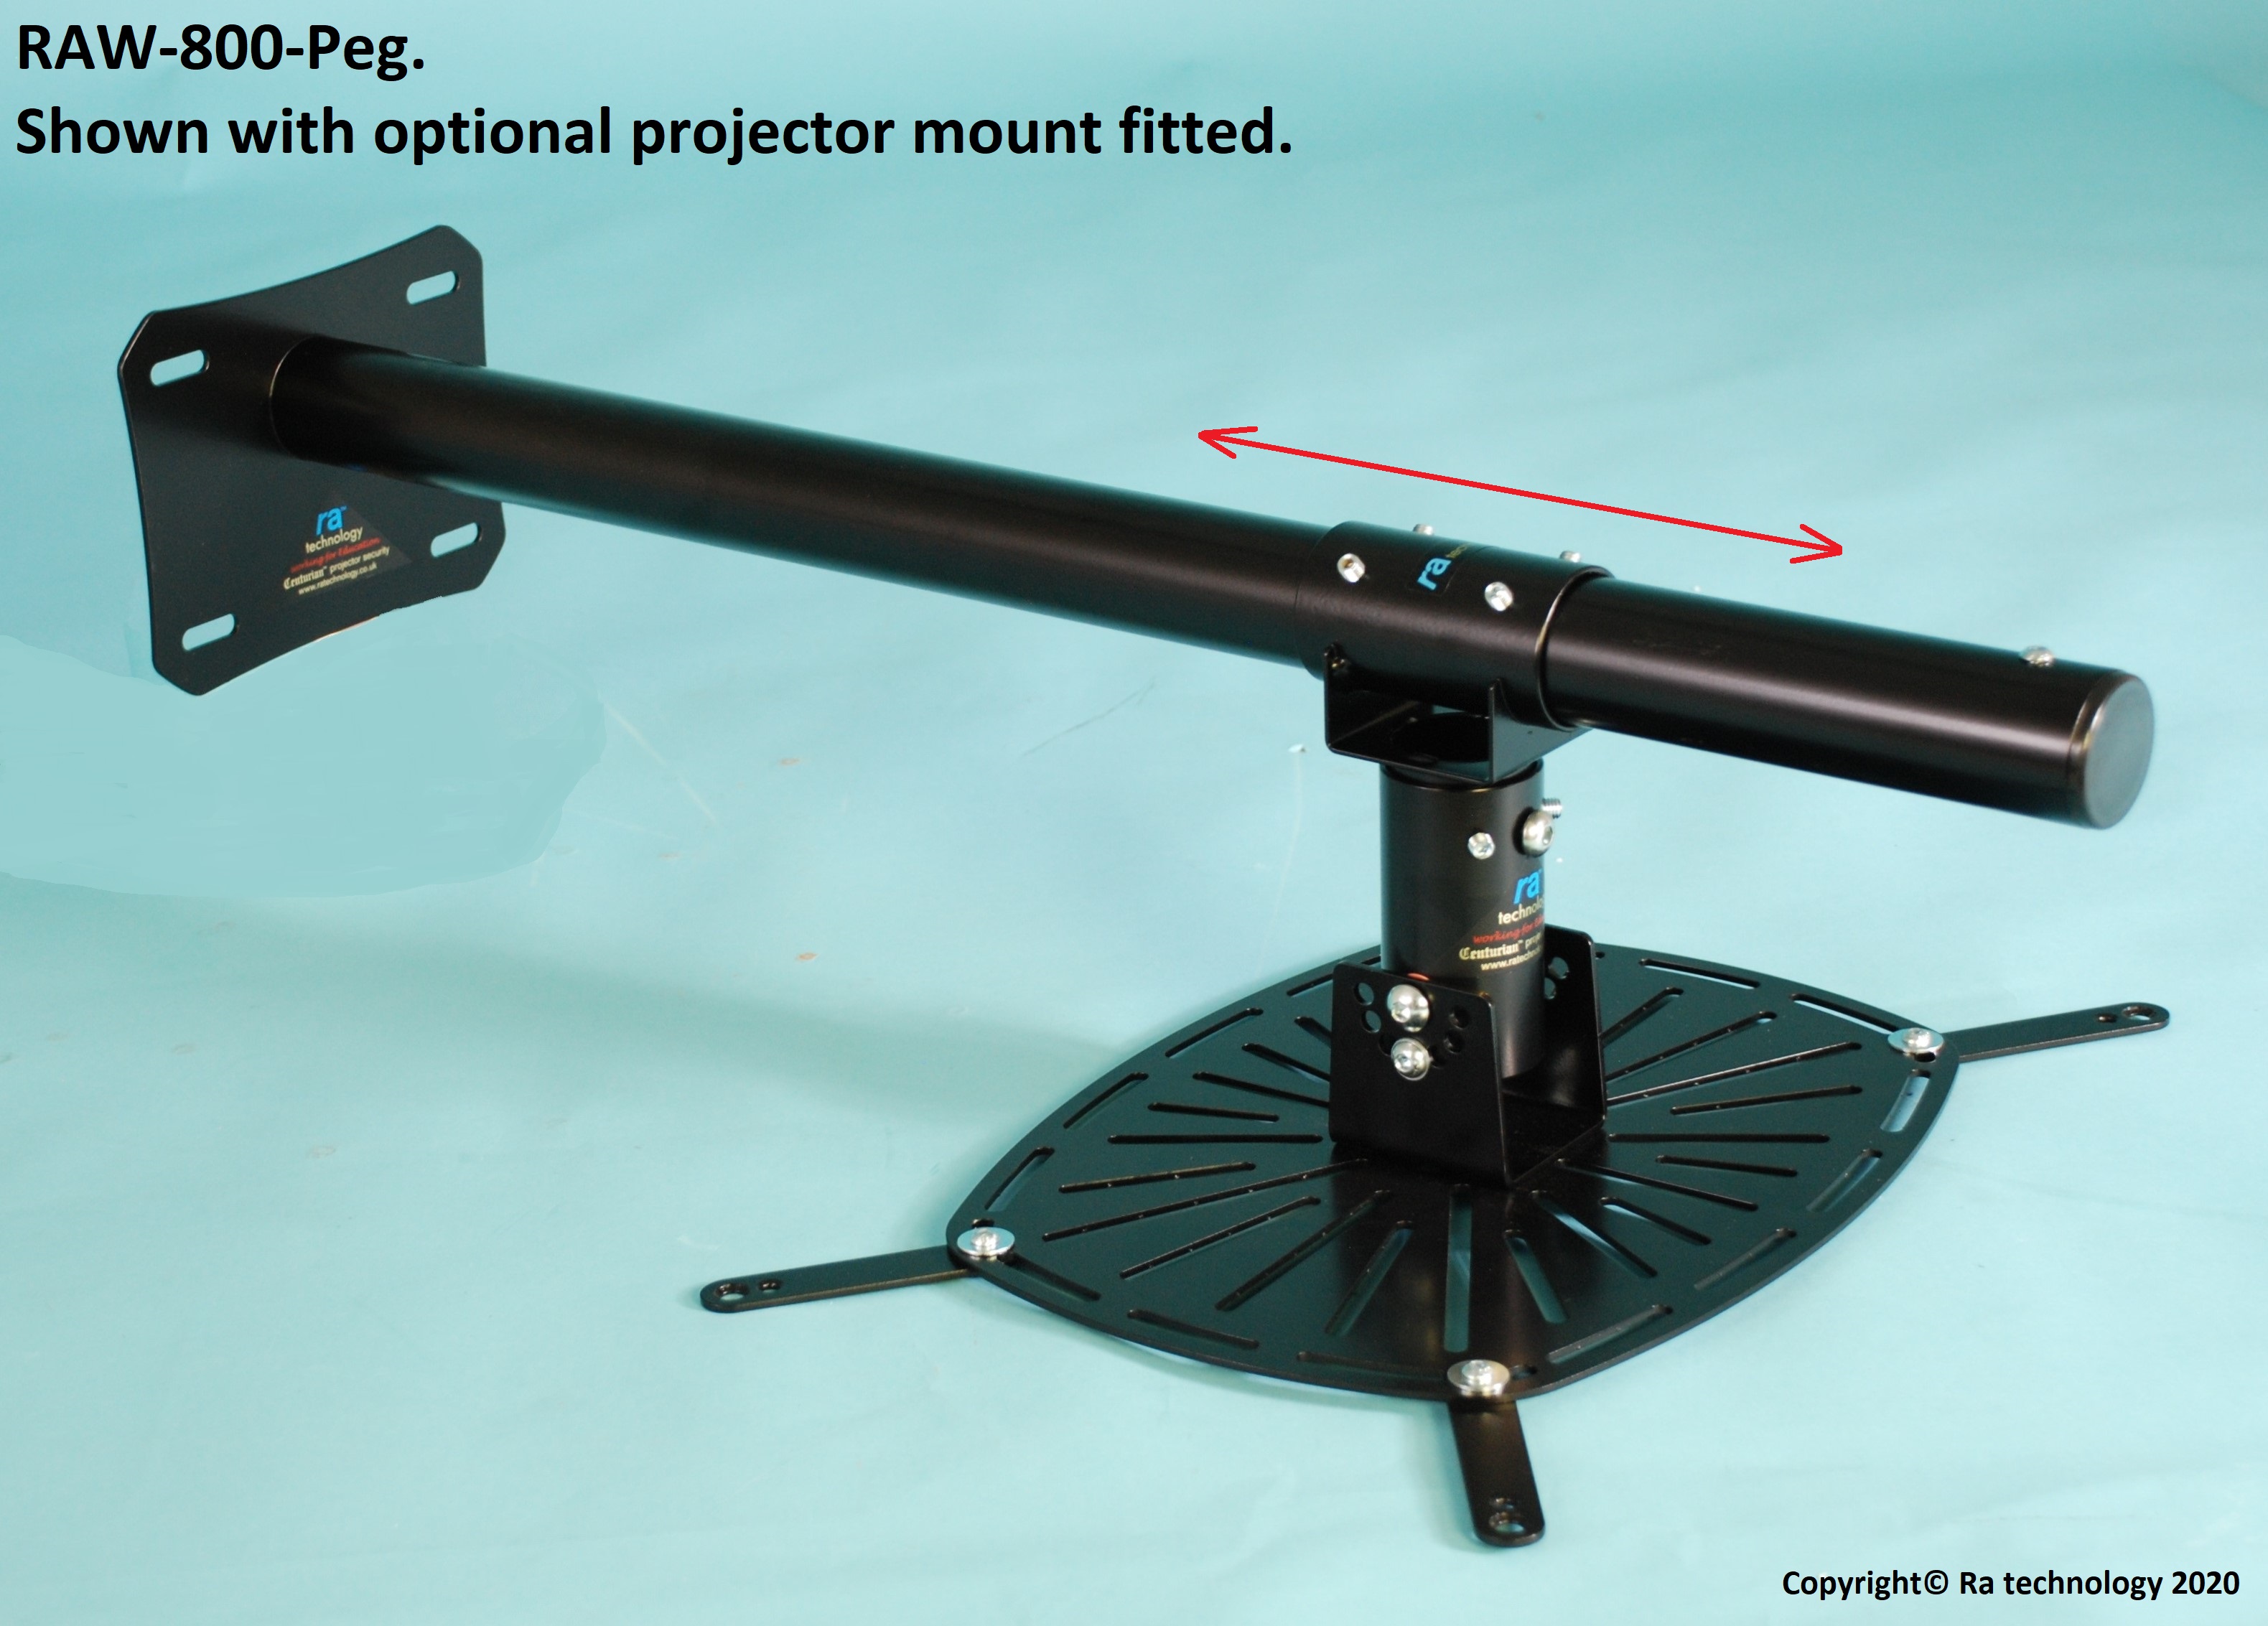 RAW-800-Peg. Wall Mount Arm With Adjustable Zoom Coupling